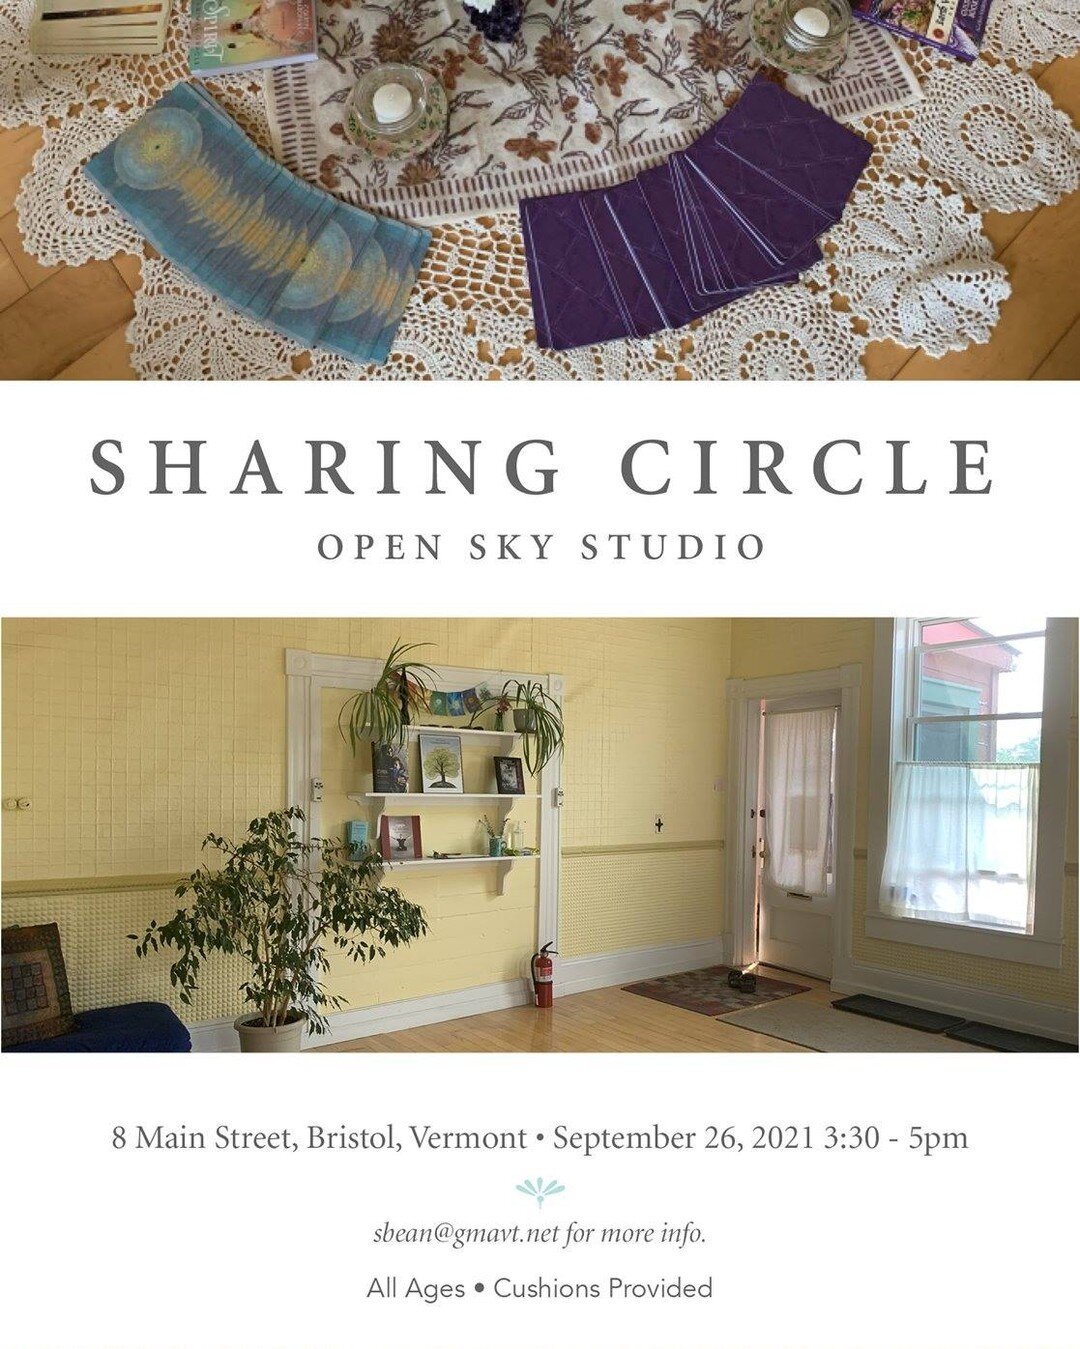 Sharing Circle is this Sunday at Open Sky Studio in Bristol, Vermont. 8 Main Street. Come share...bring a friend. #beanofthefields #magicoma #wellbeing #sharingcircle #womeninpower #stowellfarm